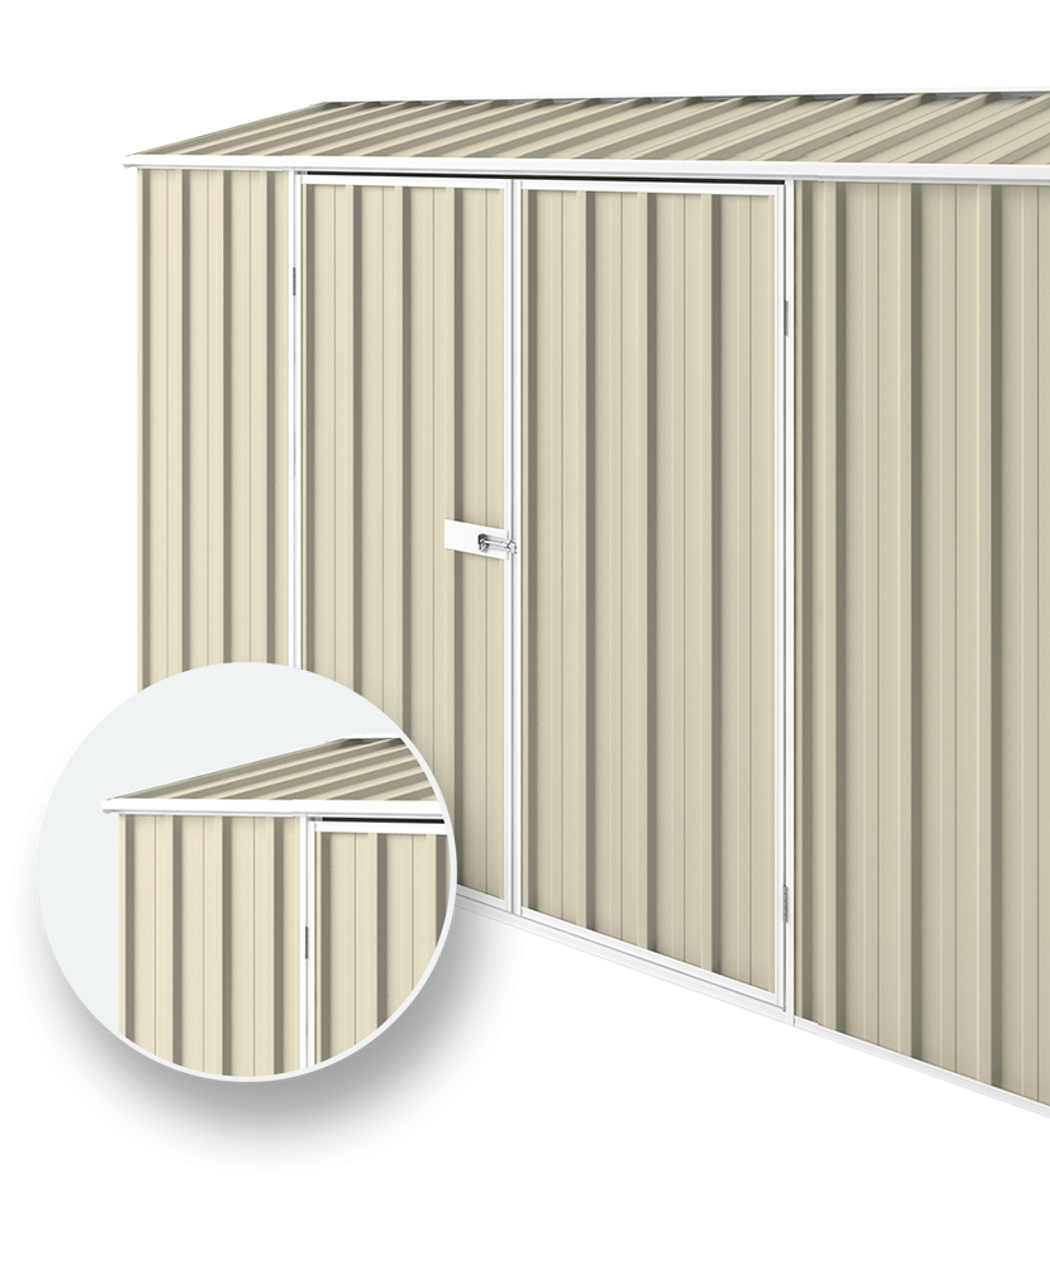 Gable Roof Garden Shed 3m (w) x 2.25m (d) - Classic